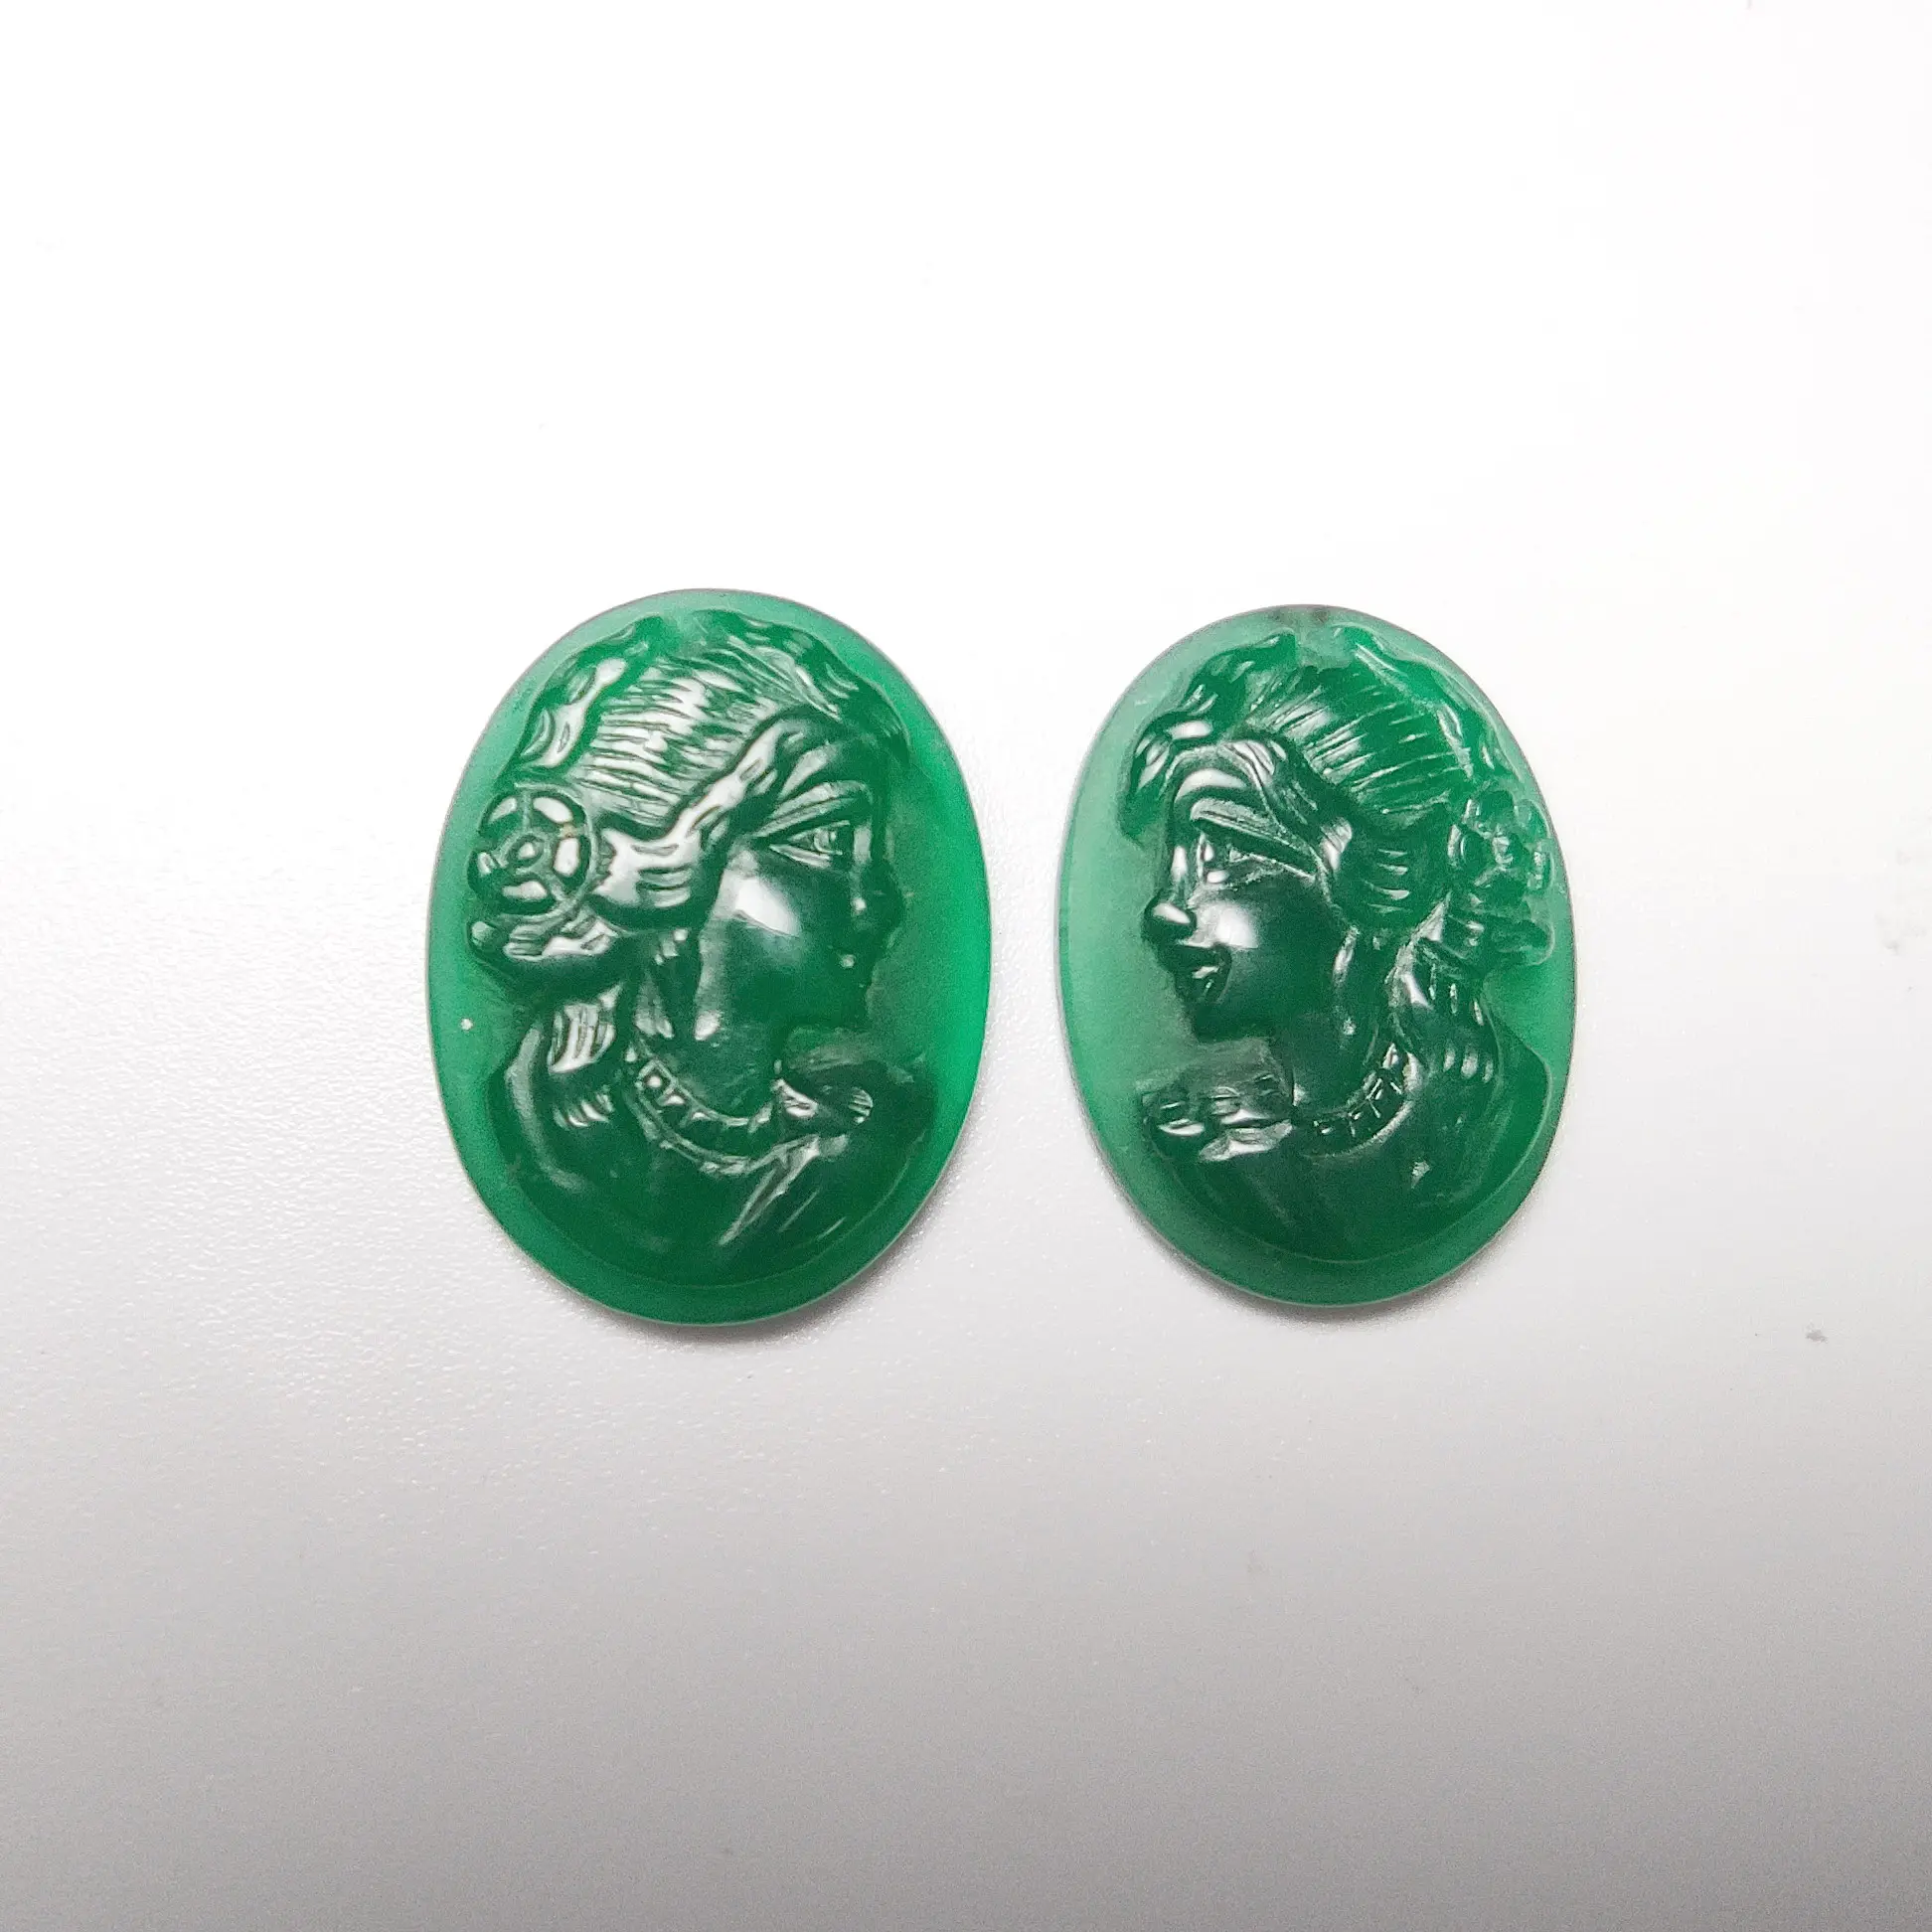 Hand Carving Gorgeous Green Agate Beauty Head With Sculpted Reliefs Cameo Semi-Precious Stones For Design